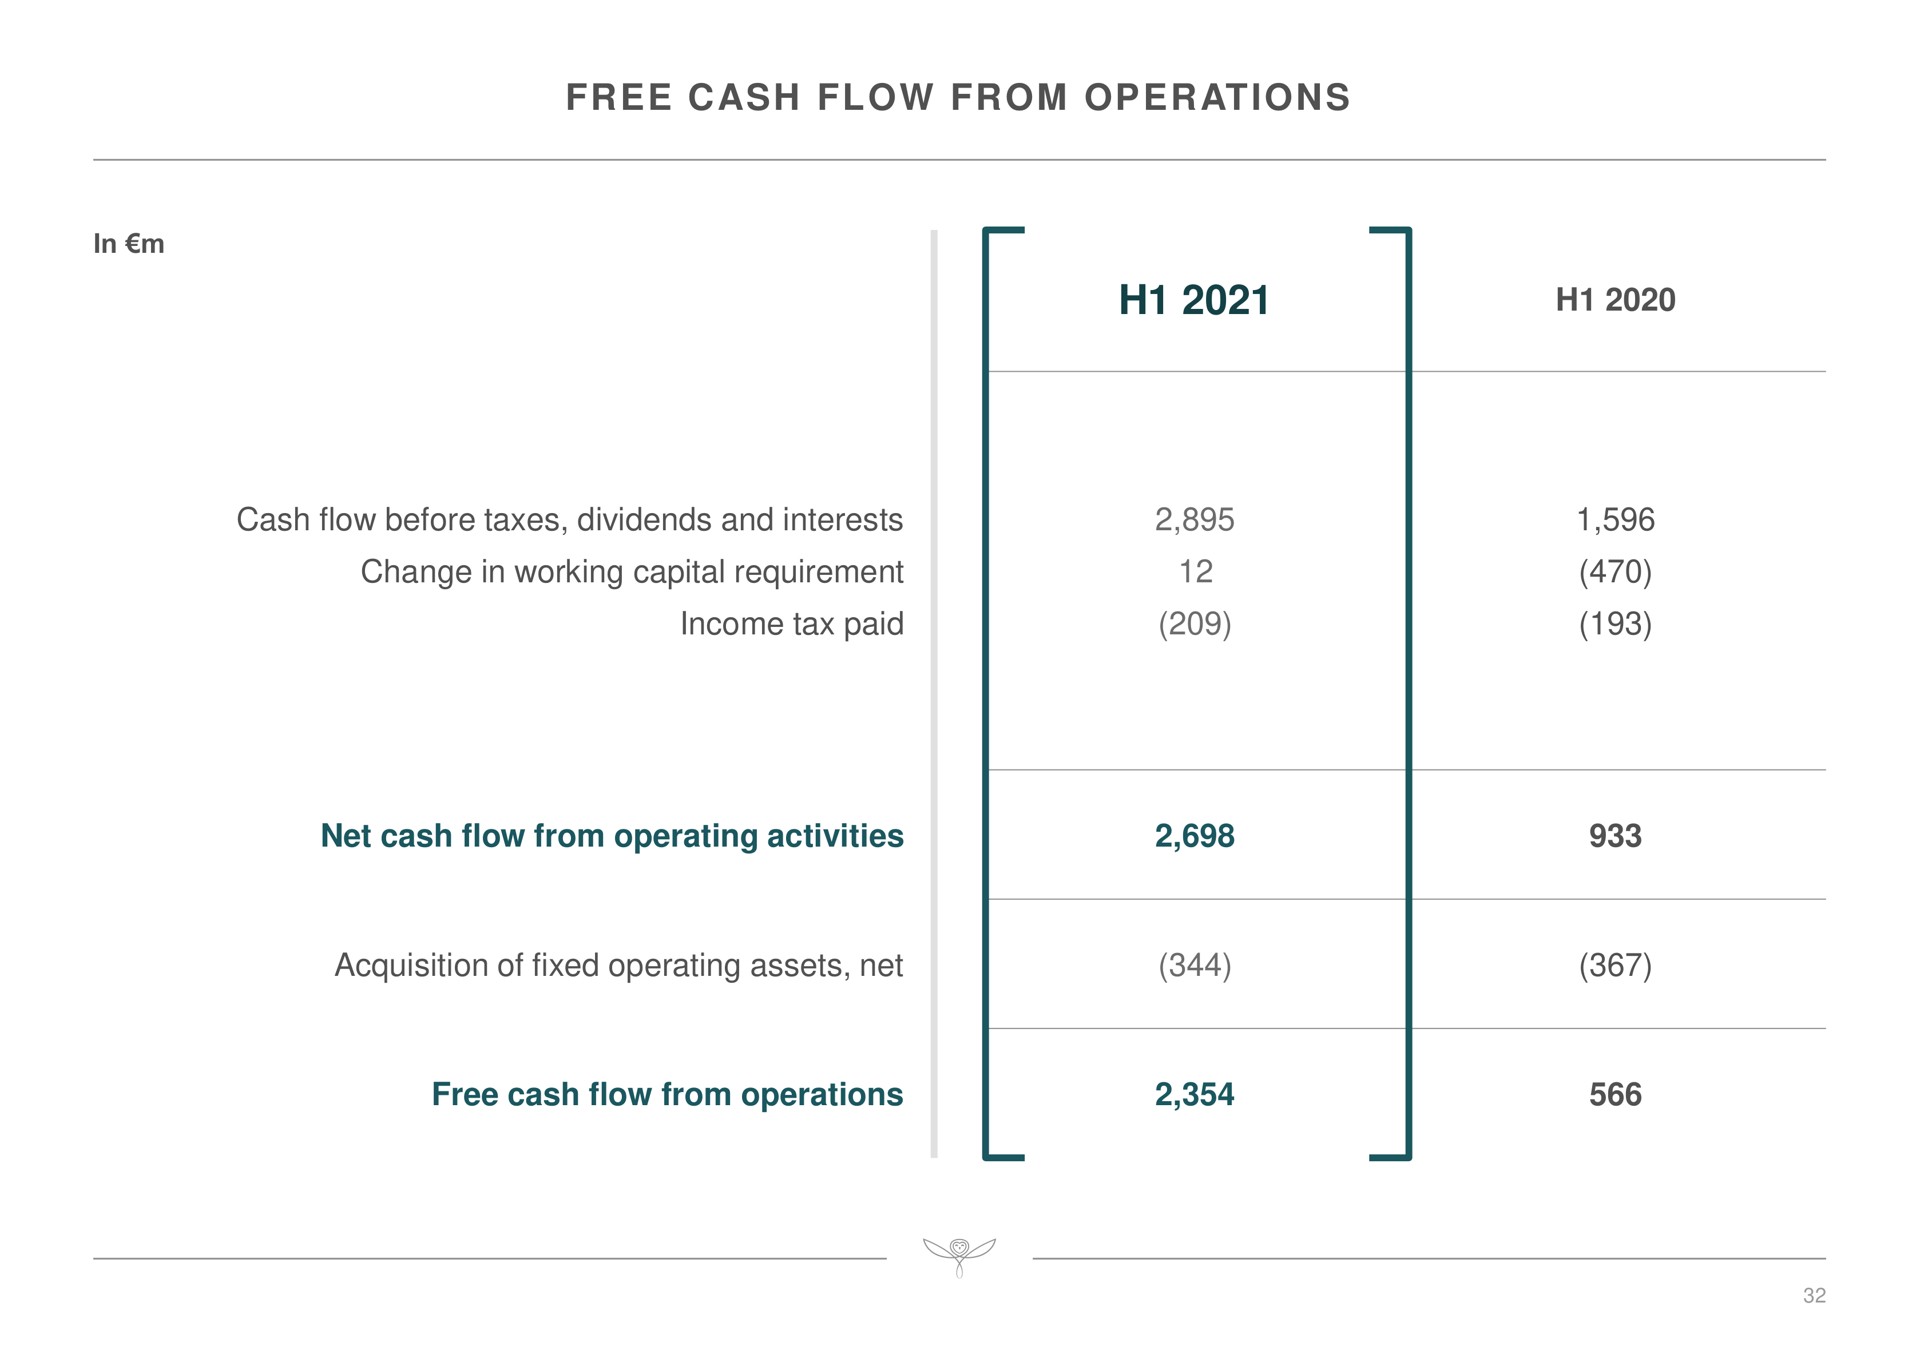 free cash flow from operations cash flow before taxes dividends and interests change in working capital requirement income tax paid net cash flow from operating activities acquisition of fixed operating assets net free cash flow from operations | Kering